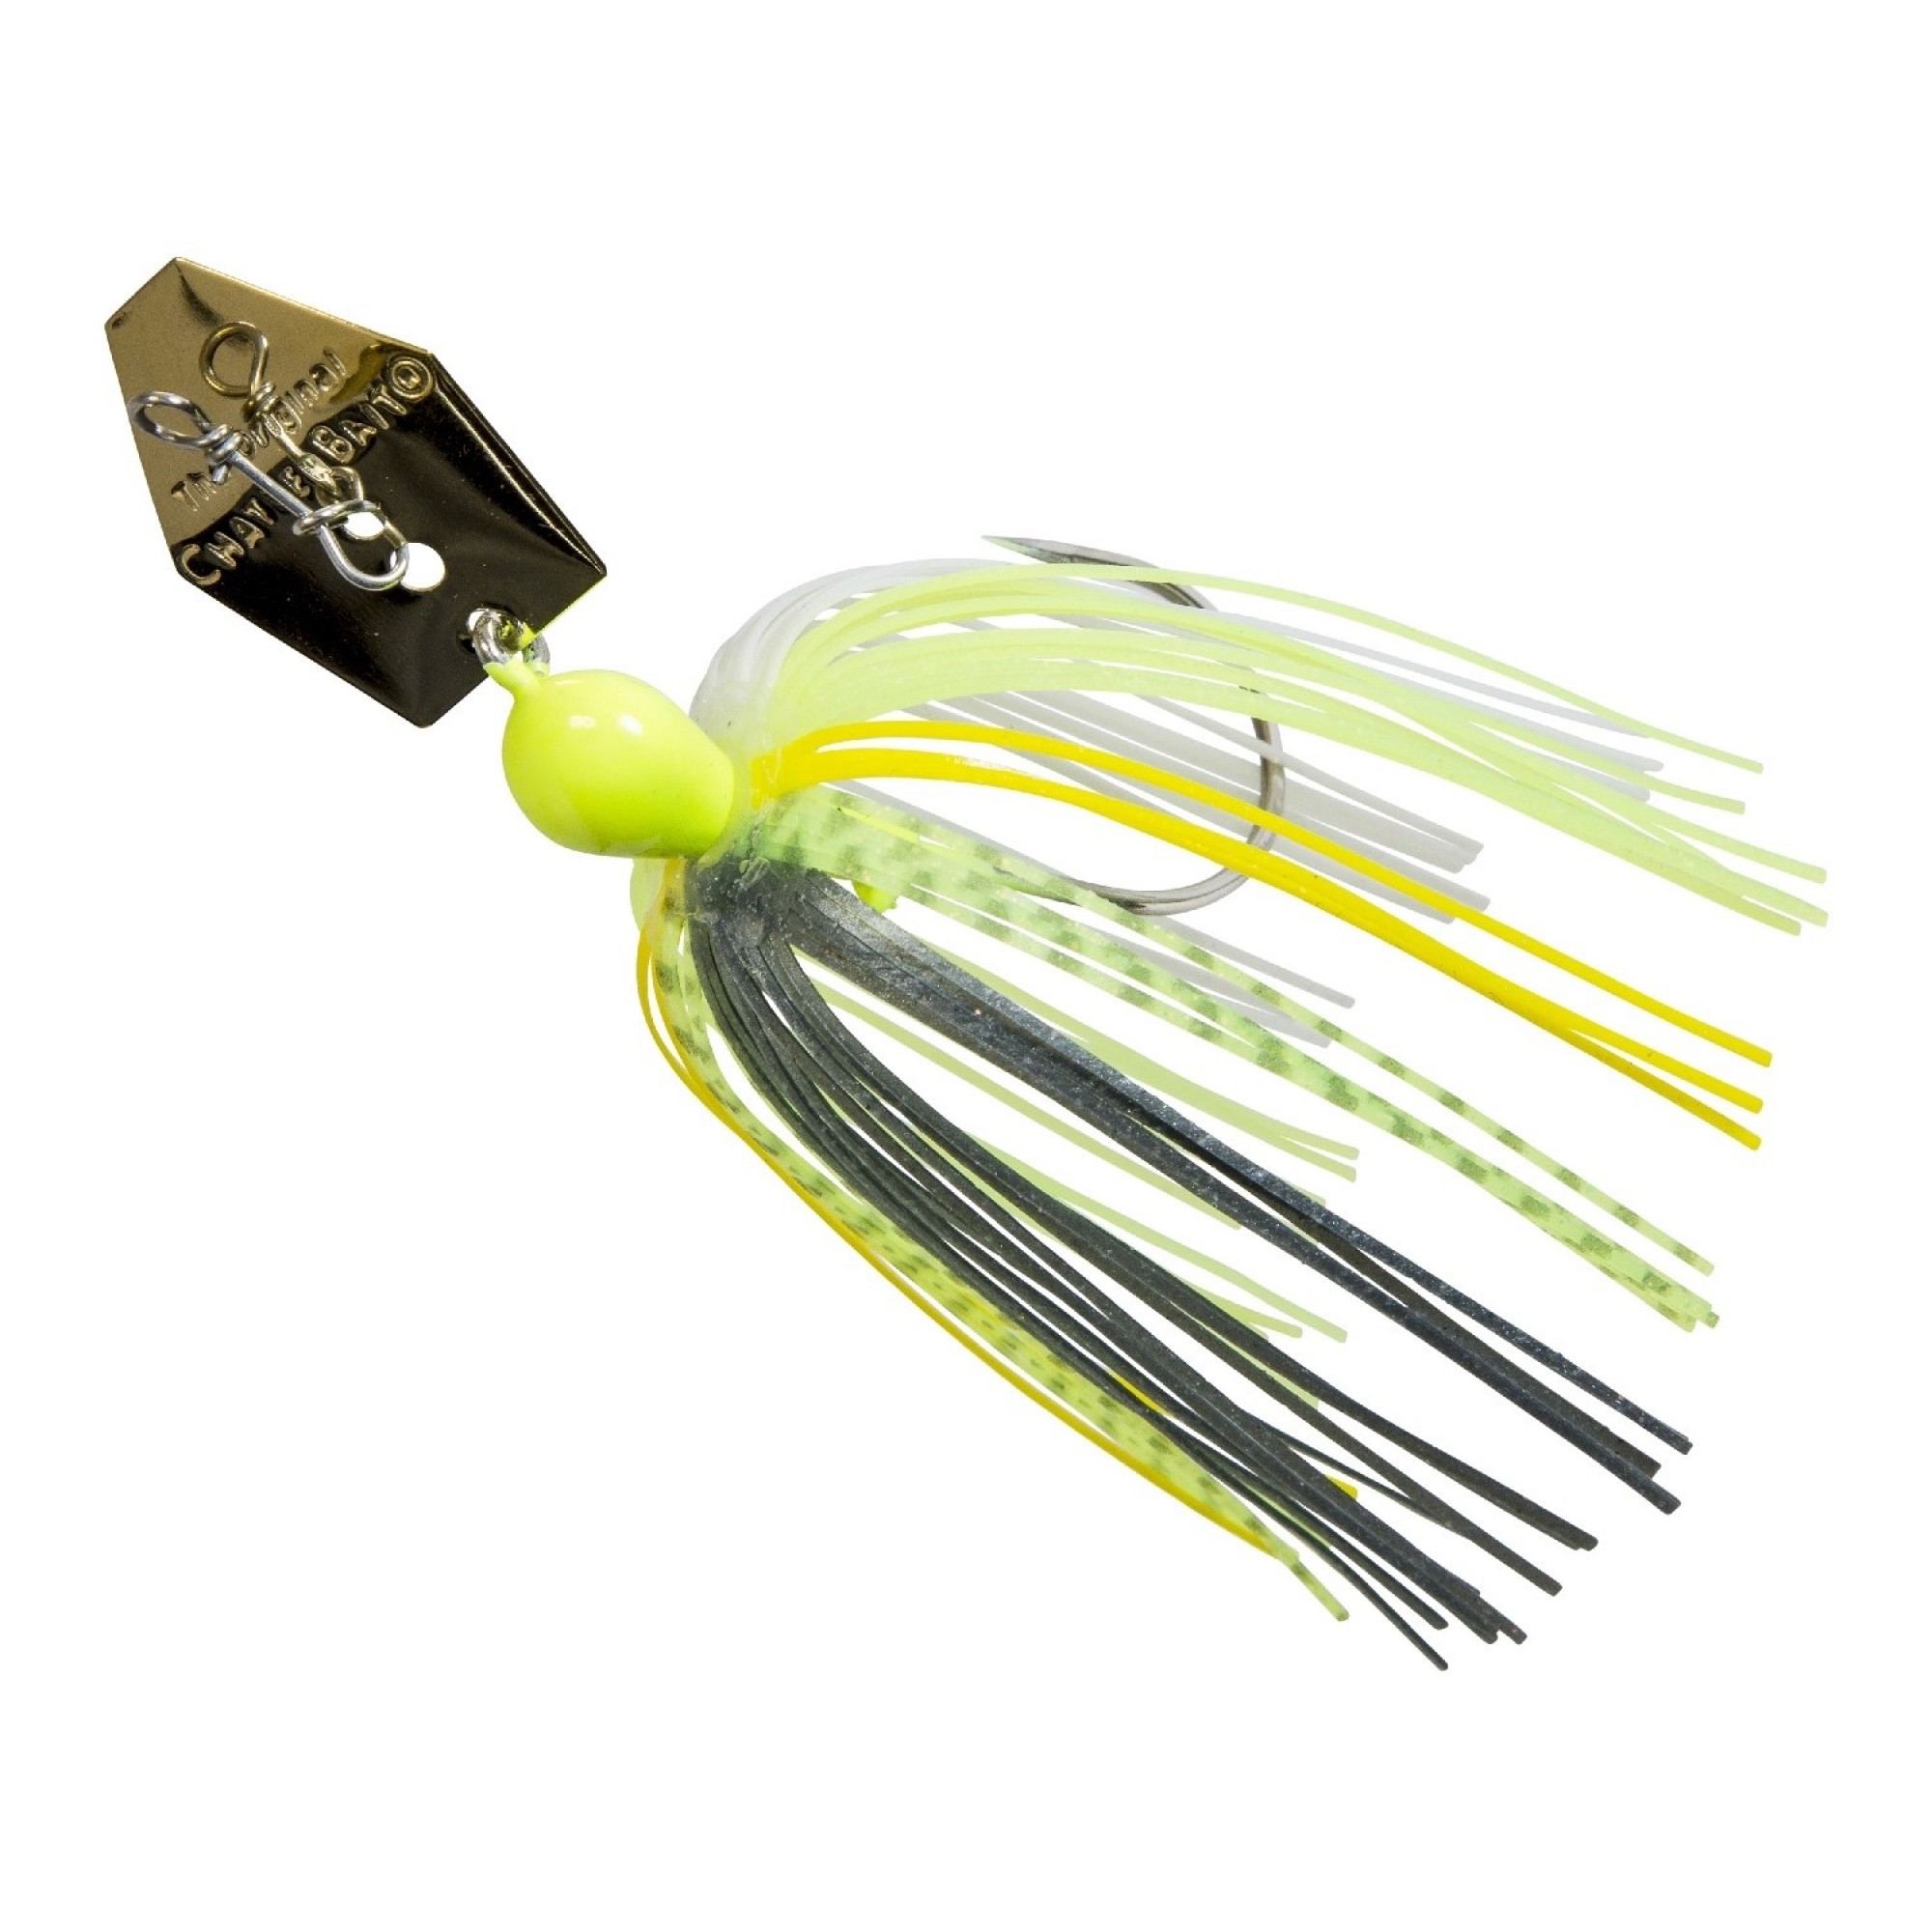 Esche-metalliche-chatterbait-chatter-bladed-jig-z-man-the-original-chatterbait-64-chart-sexy-shad-lure-fishing-planet.